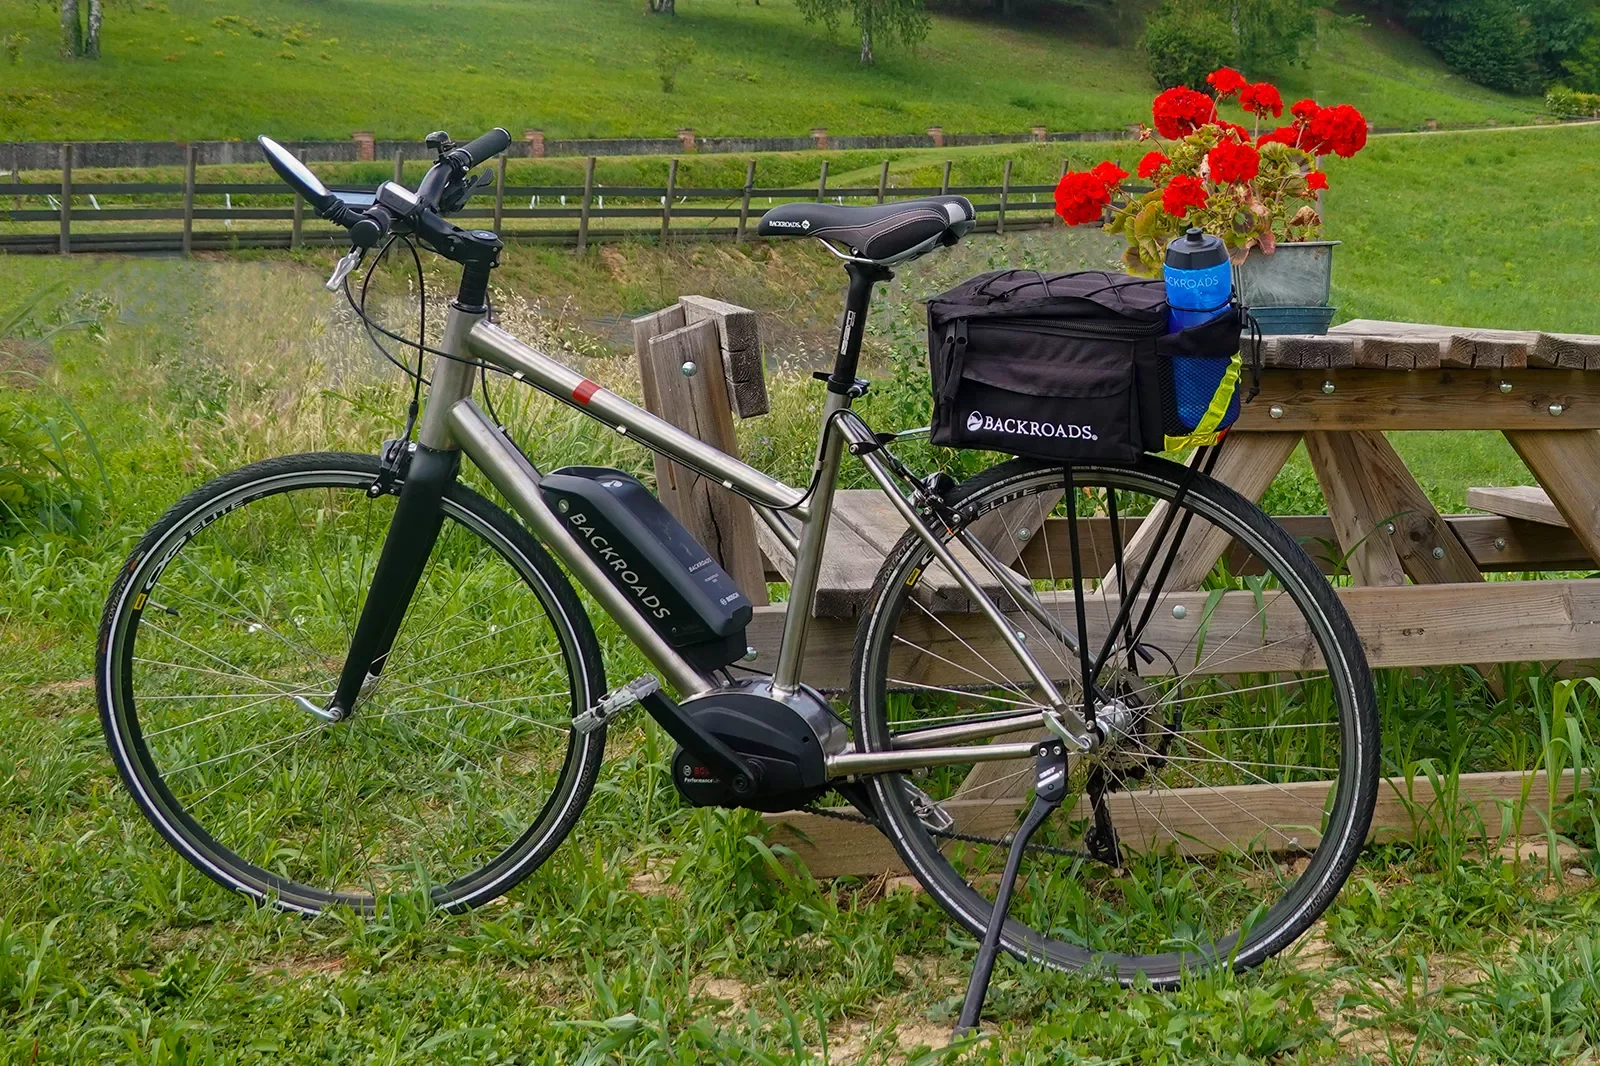 Shot of ebike, red flowers on wooden table behind it.